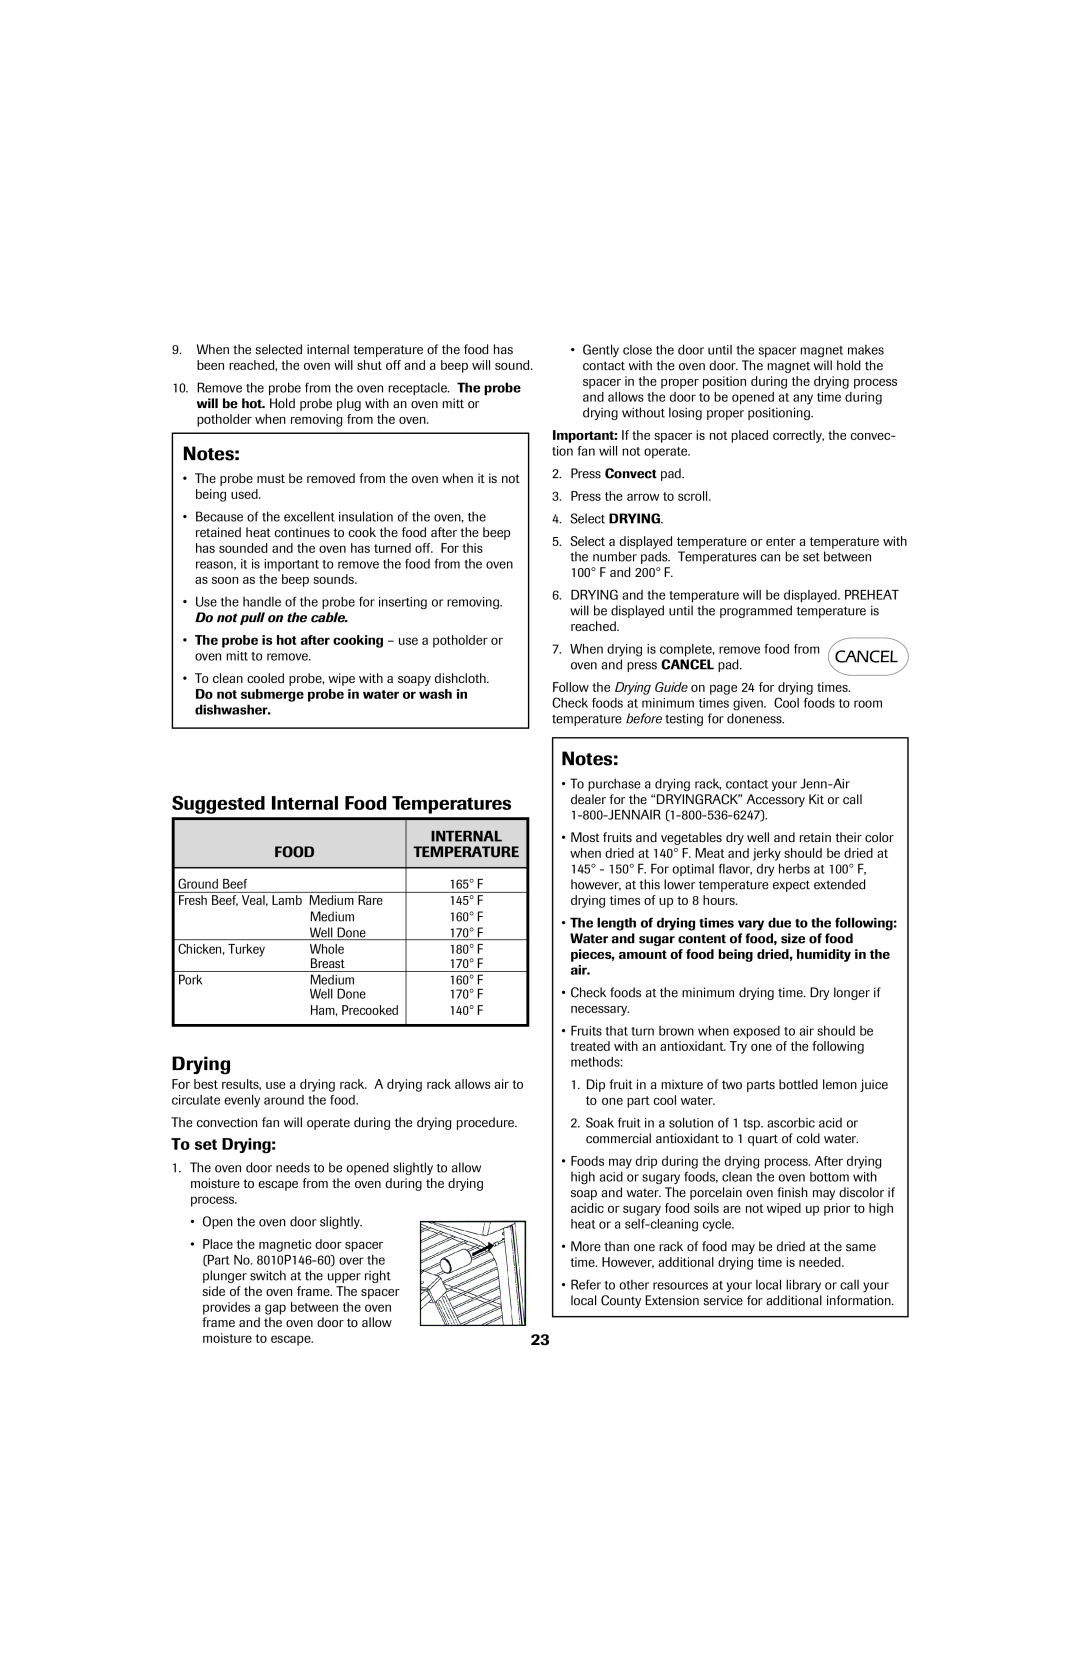 Jenn-Air 8113P757-60 important safety instructions Suggested Internal Food Temperatures, To set Drying, Notes 